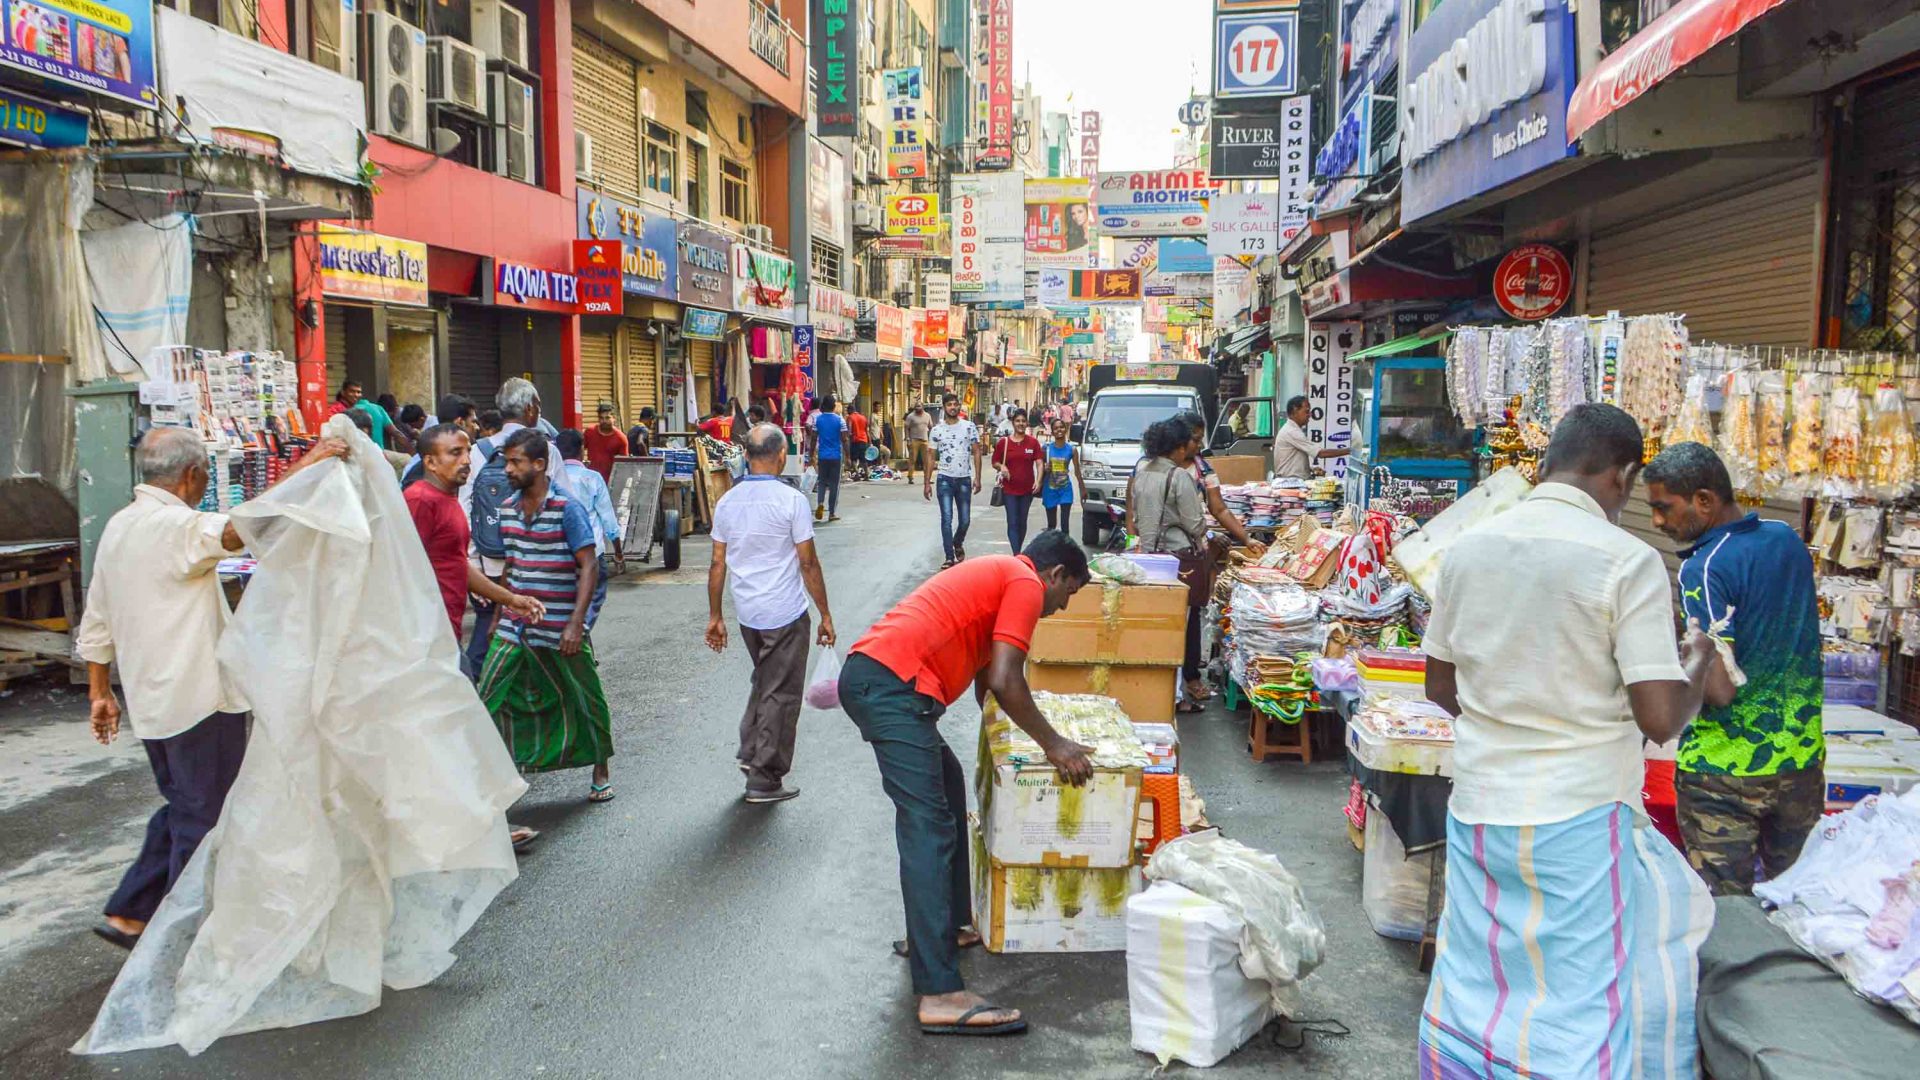 Markets in the lively Colombo neighborhood of Pettah.